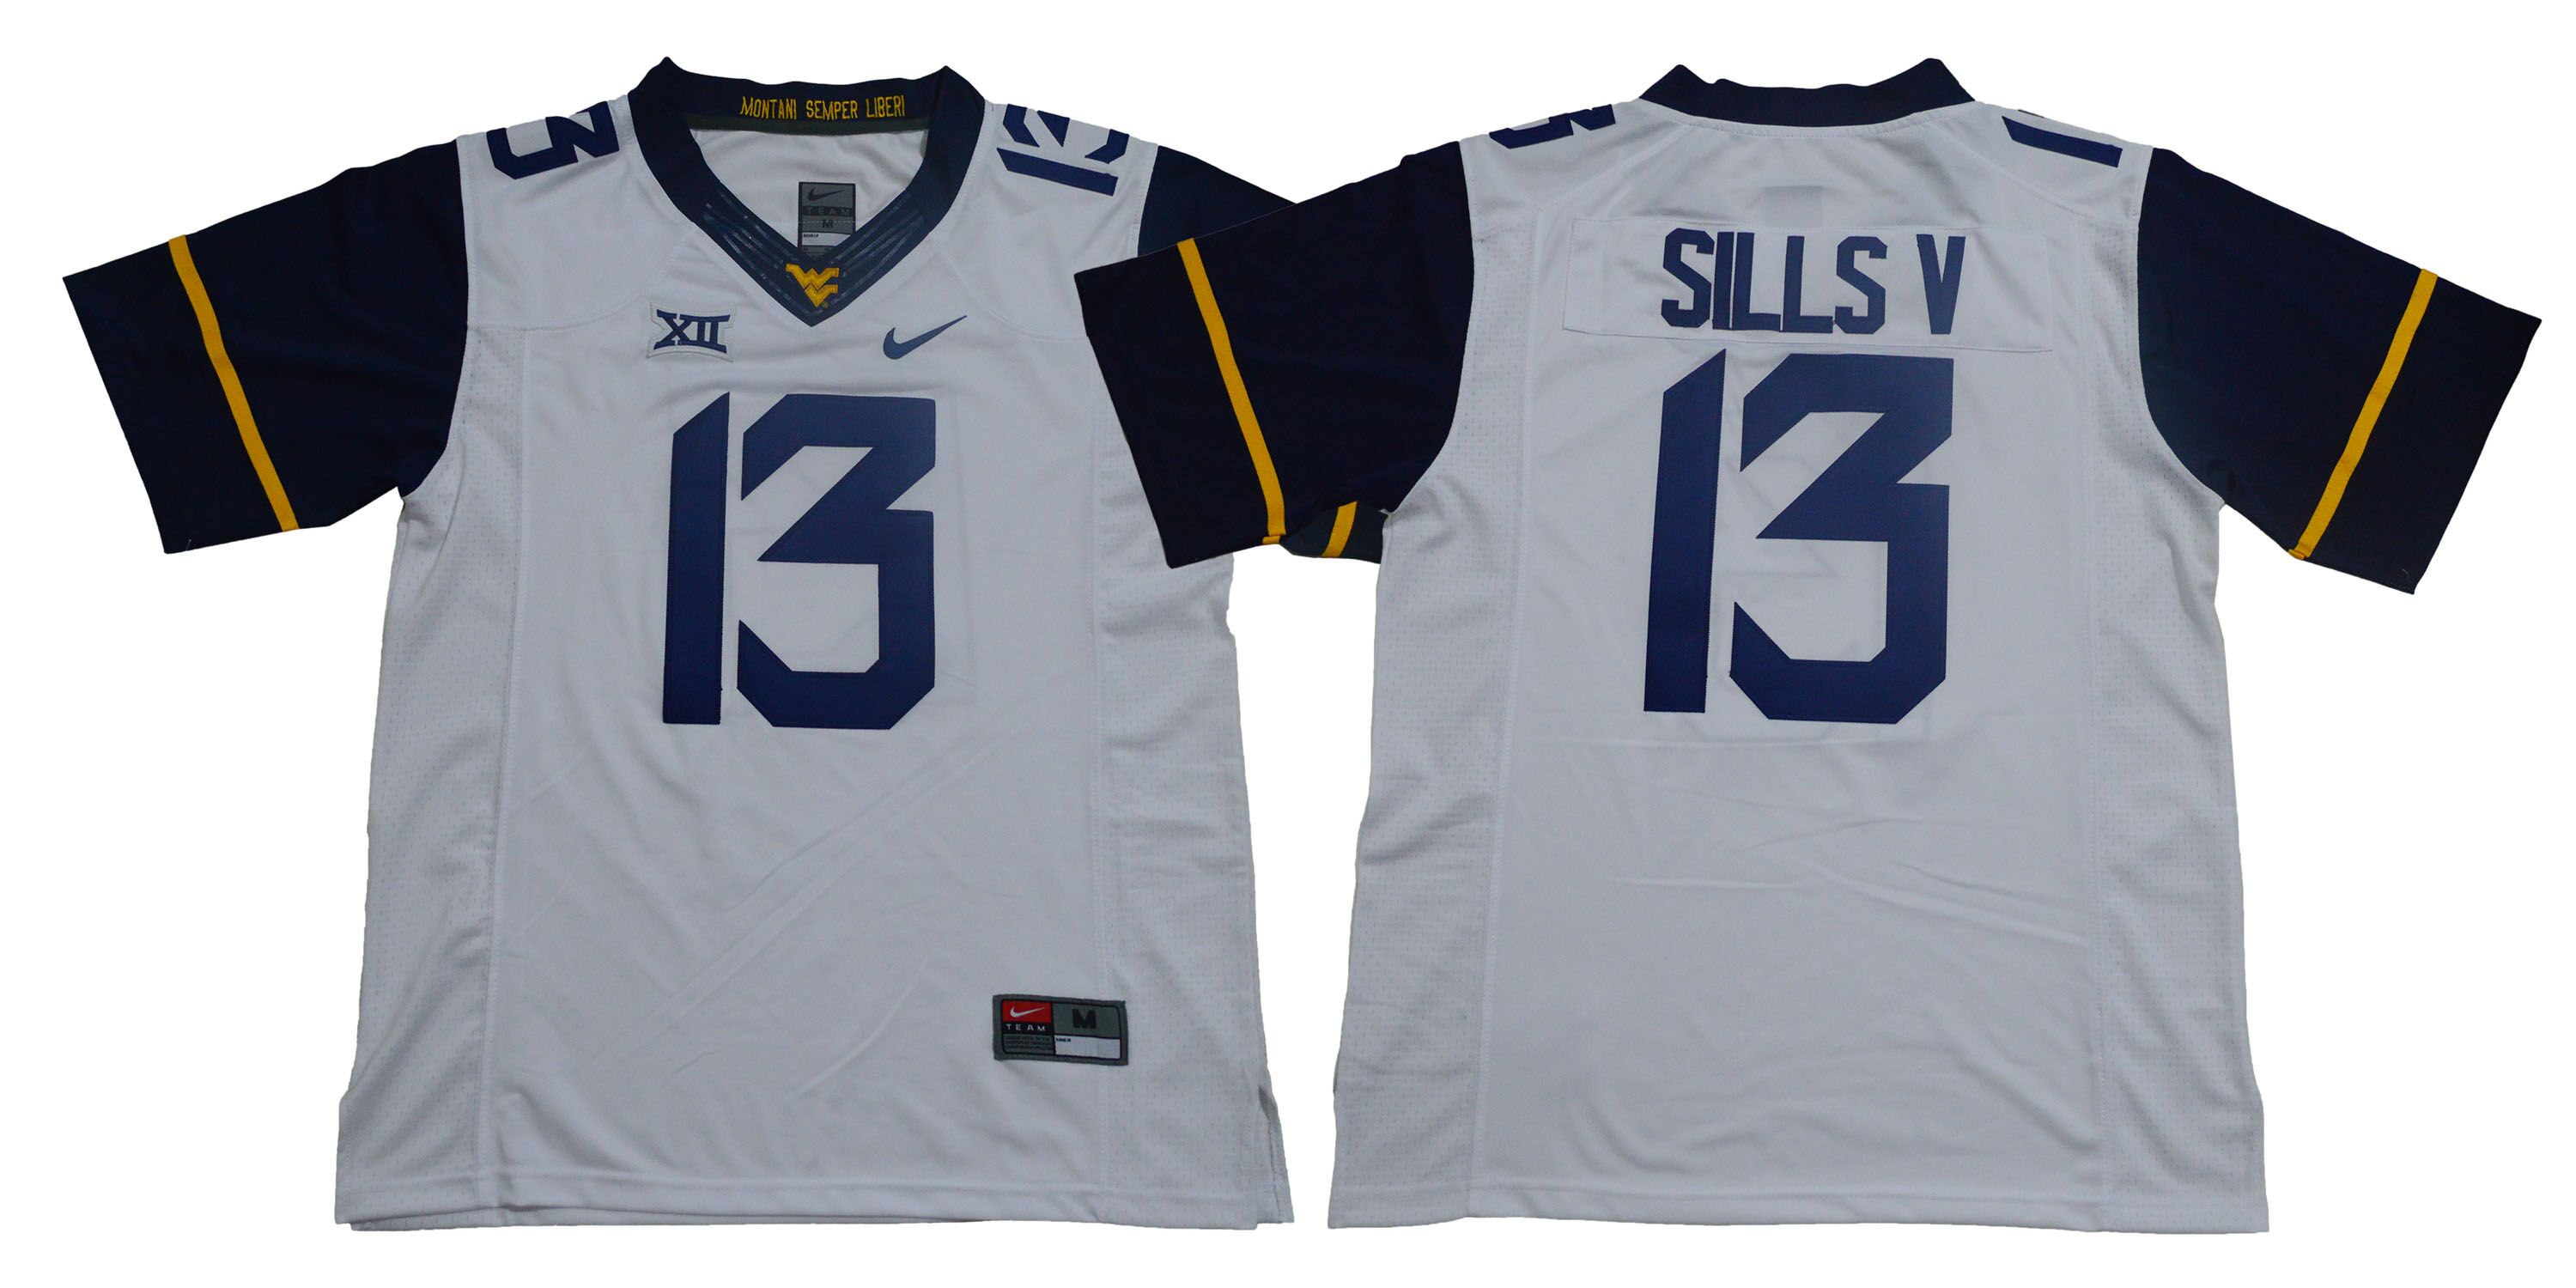 West Virginia Mountaineers 13 David Sills V White Nike College Football Jersey